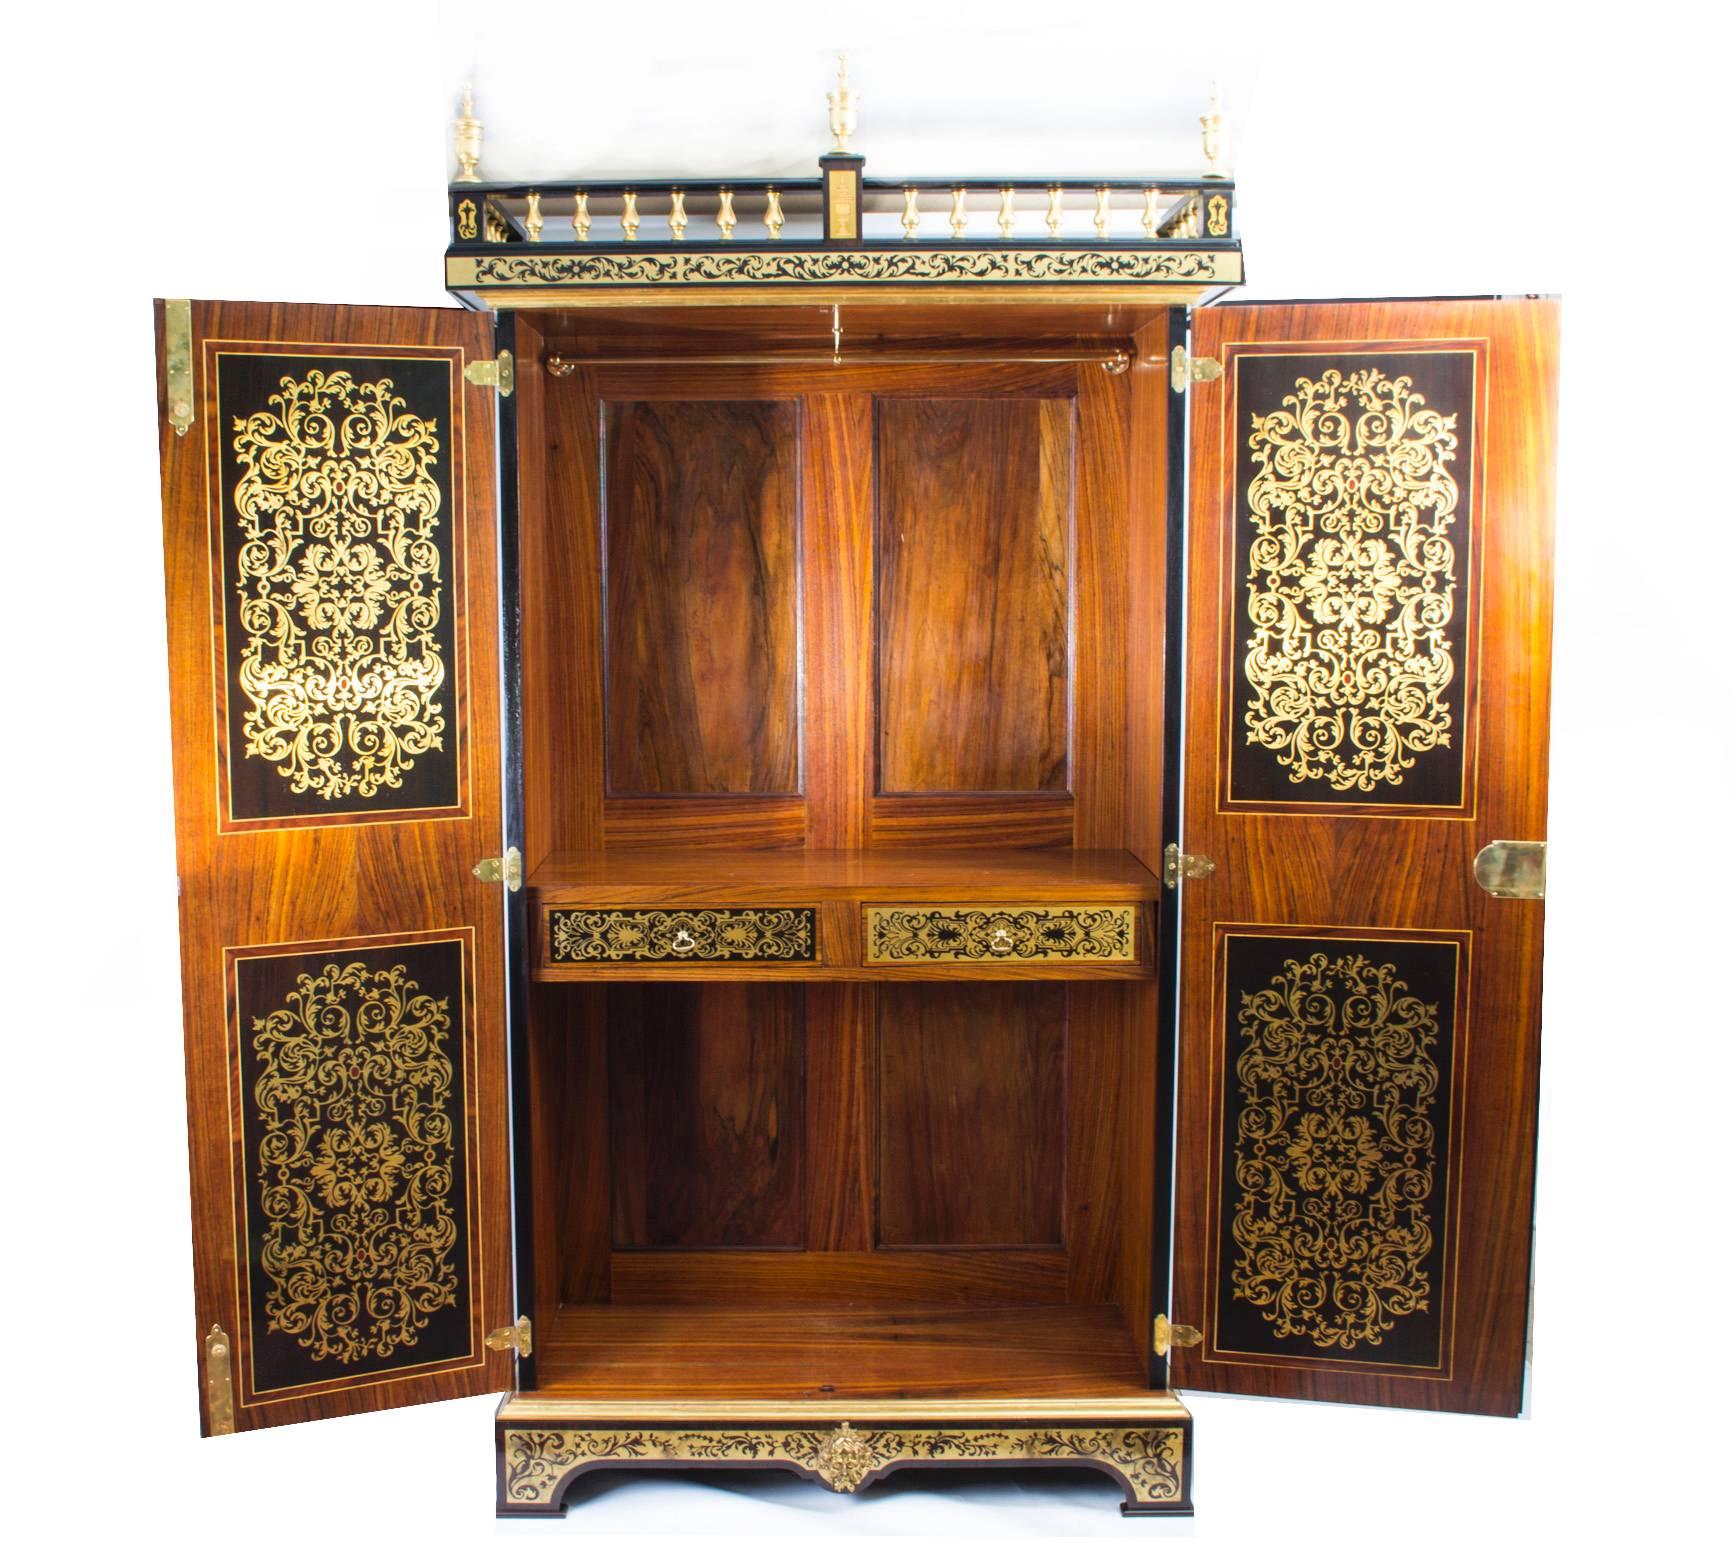 This is an absolutely exquisite antique French rosewood and Boulle marquetry cabinet, dating from the early 20th century.

It has been accomplished in rosewood and cut brass marquetry with an amazing pair of full length doors, each with four